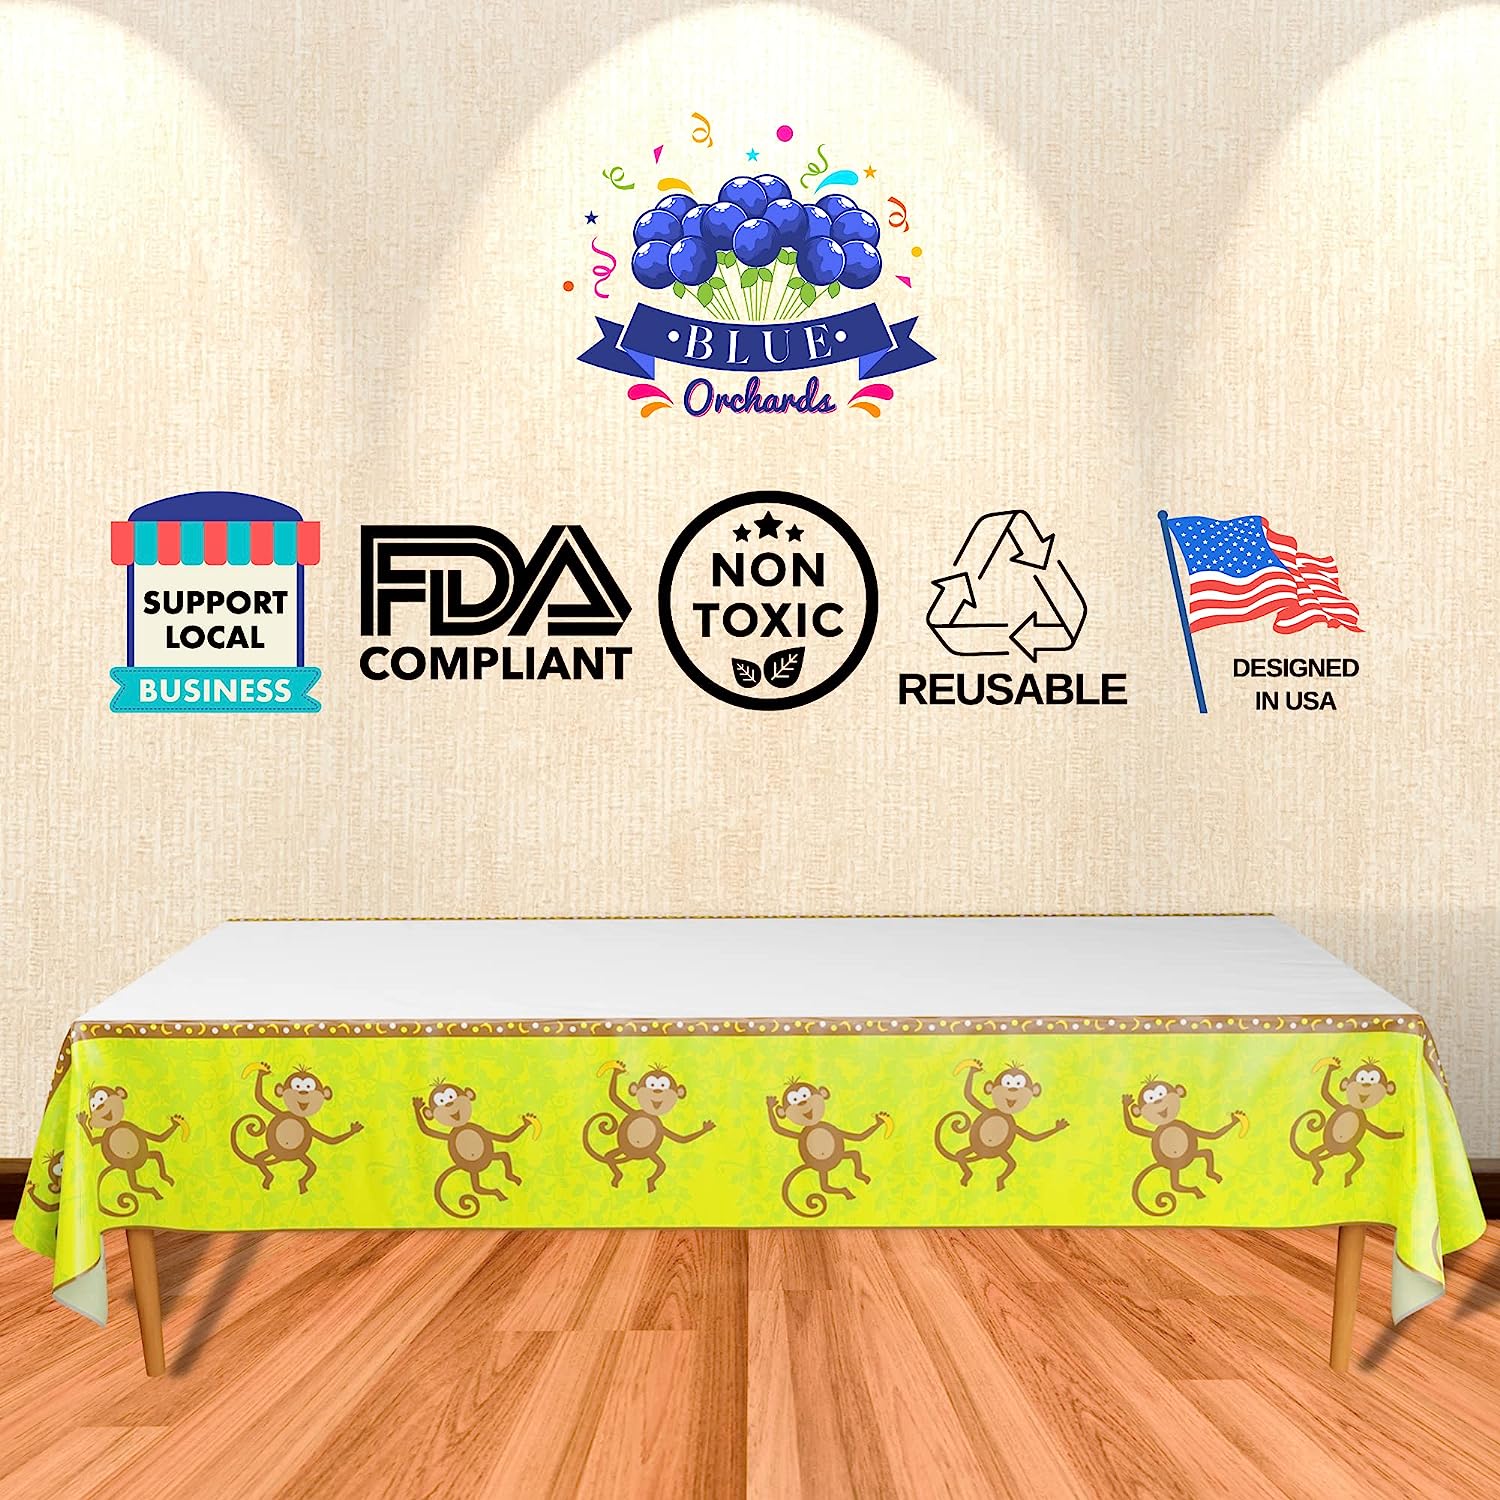 Image of FDA compliant, non toxic, reusable, and designed in USA Monkey Party Table Covers measuring 54"x108", featuring a cute monkey design. These table covers are perfect for monkey-themed parties, jungle baby showers, or any other festive occasion. The covers are displayed on a plain background.